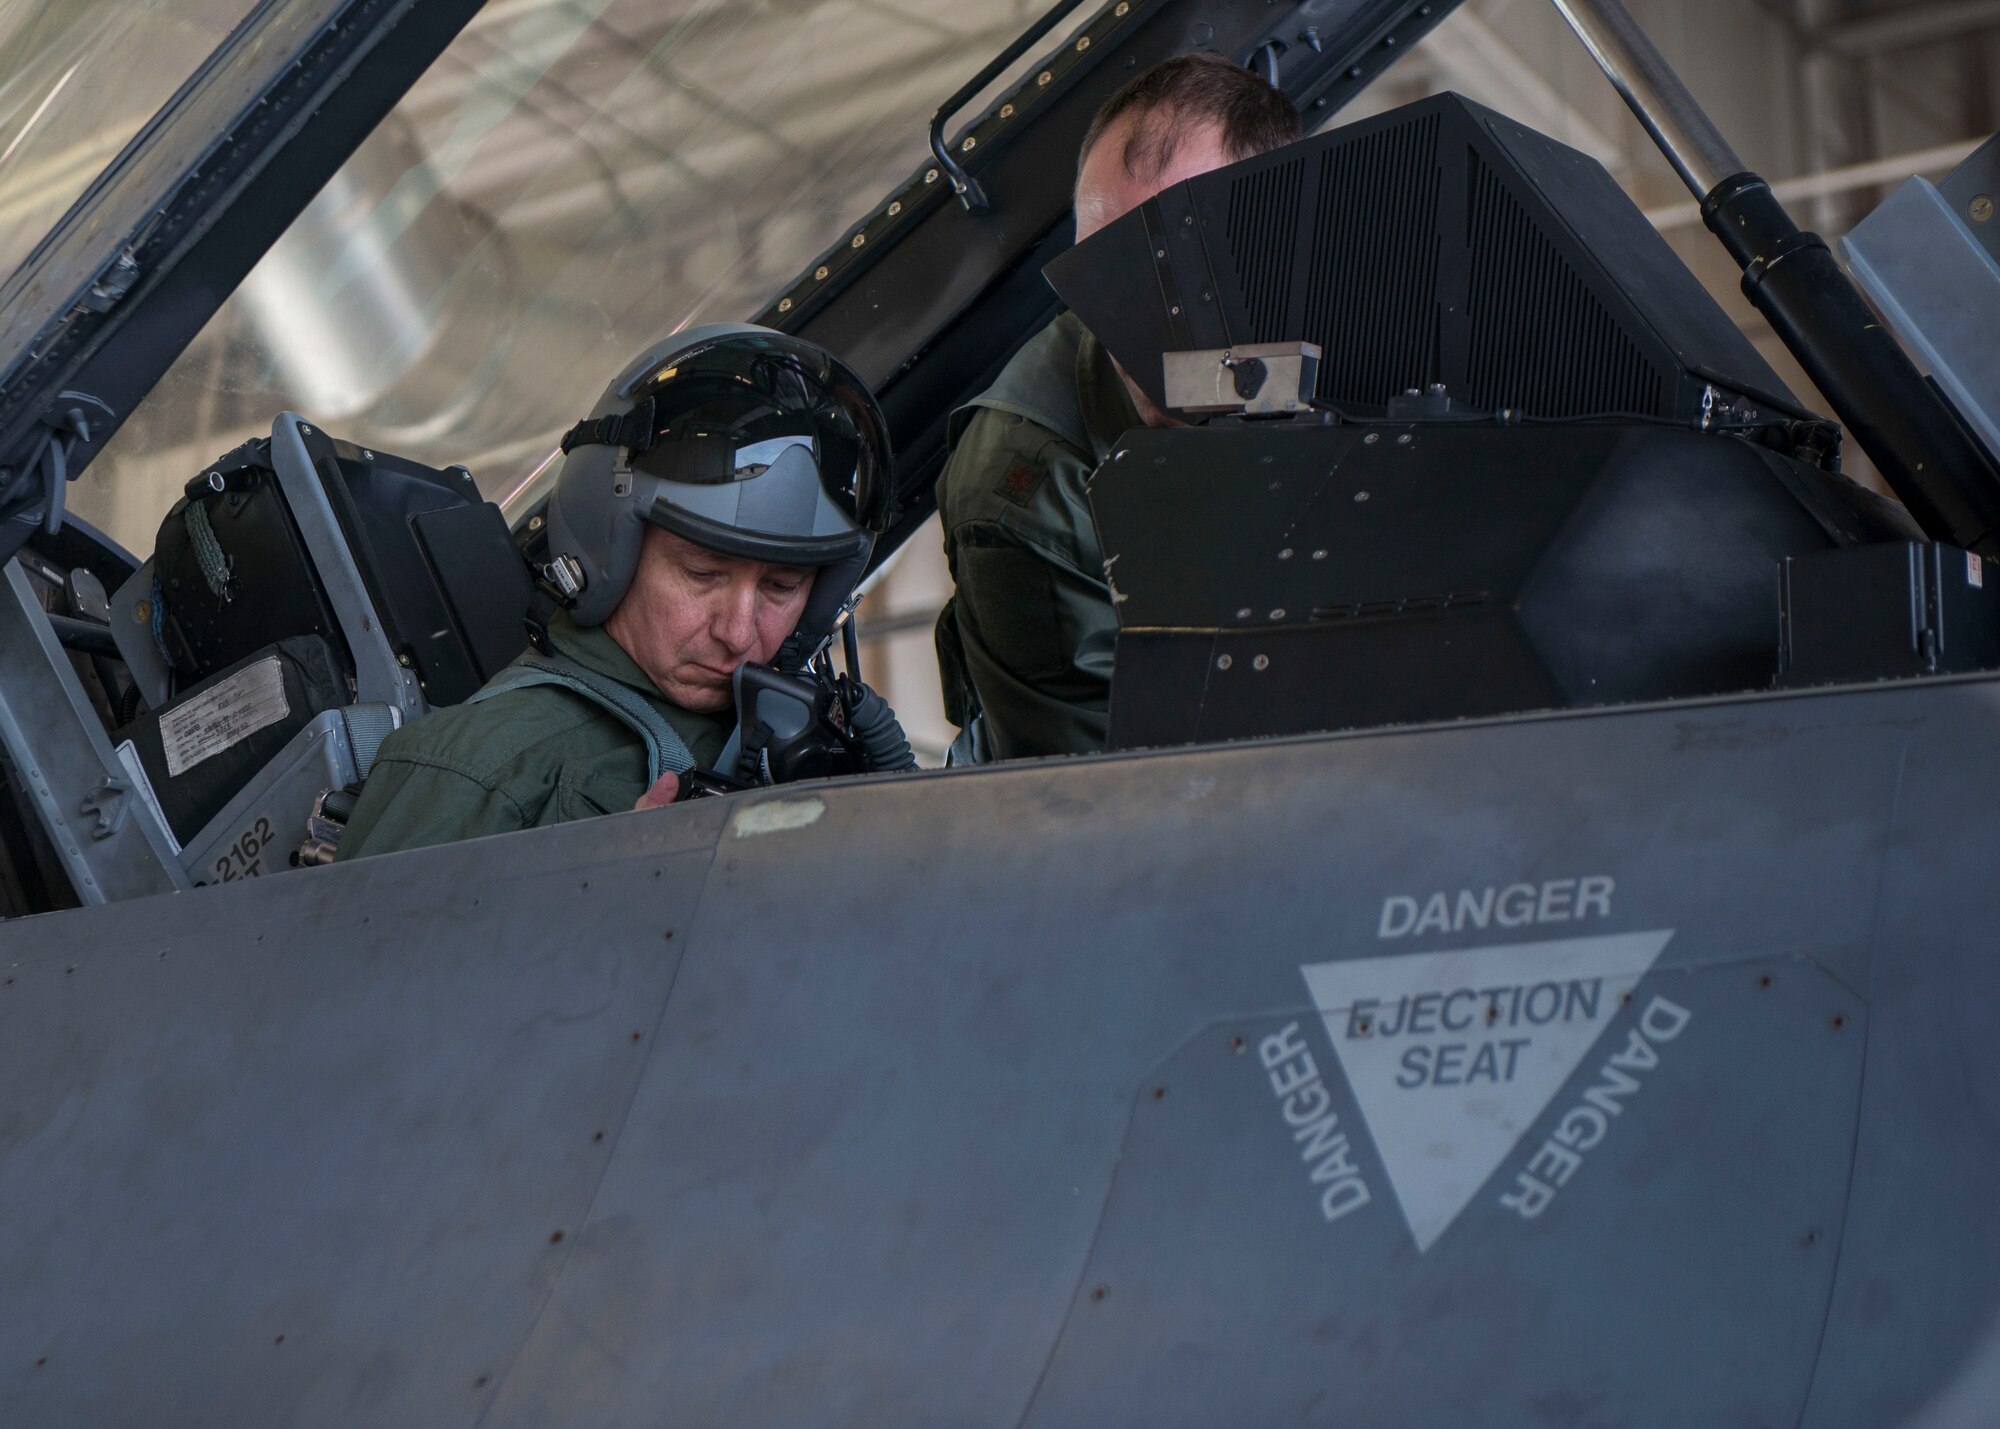 Brig. Gen. Eric Sanchez, the Commanding General at White Sands Missile Range, receives instruction from Maj. Brent Ellis, a fighter pilot with the 311th Fighter Squadron, prior to a familiarization flight in an F-16 Fighting Falcon, at Holloman Air Force Base, N.M., on Jan 9, 2017. Sanchez was offered a flight in an F-16 Fighting Falcon to gain a better understanding of the aircraft’s mission and its capabilities. (U.S. Air Force photo by Airman 1st Class Alexis P. Docherty)